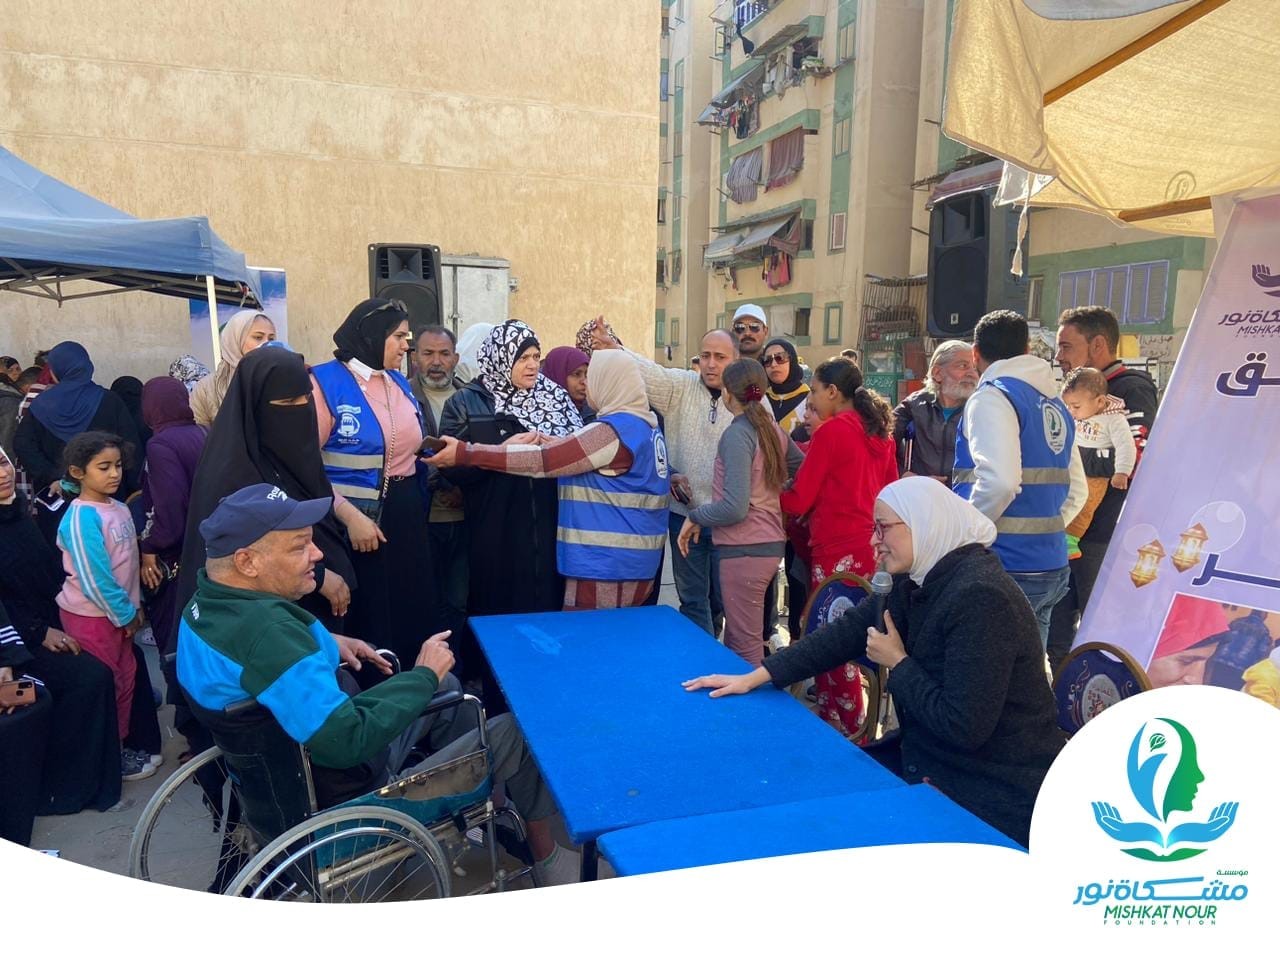 In celebration of the blessed month of Ramadan, the Mashkaat Noor Foundation launches 1000 micro-projects as part of the "People's Needs" and "Cleverness of Egypt" initiatives.